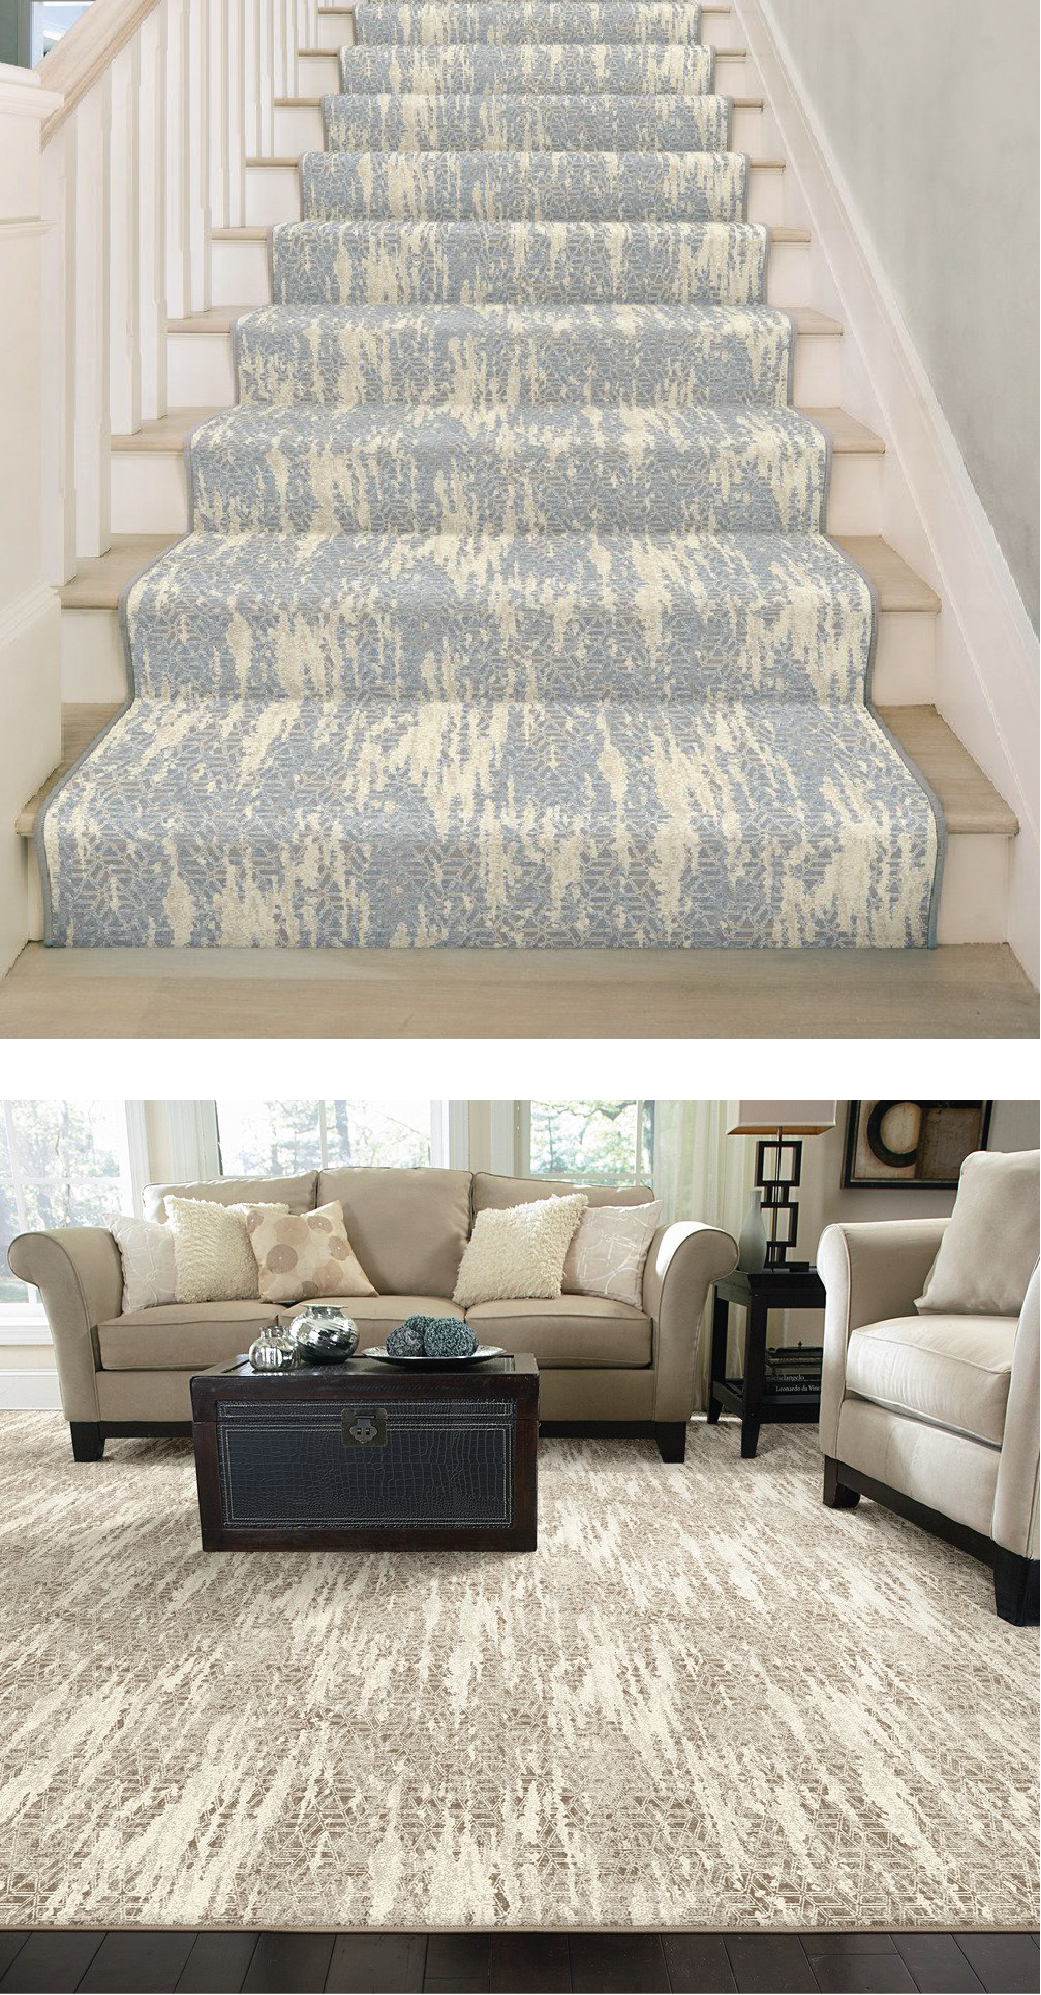 Stair Runners and Matching area rugs